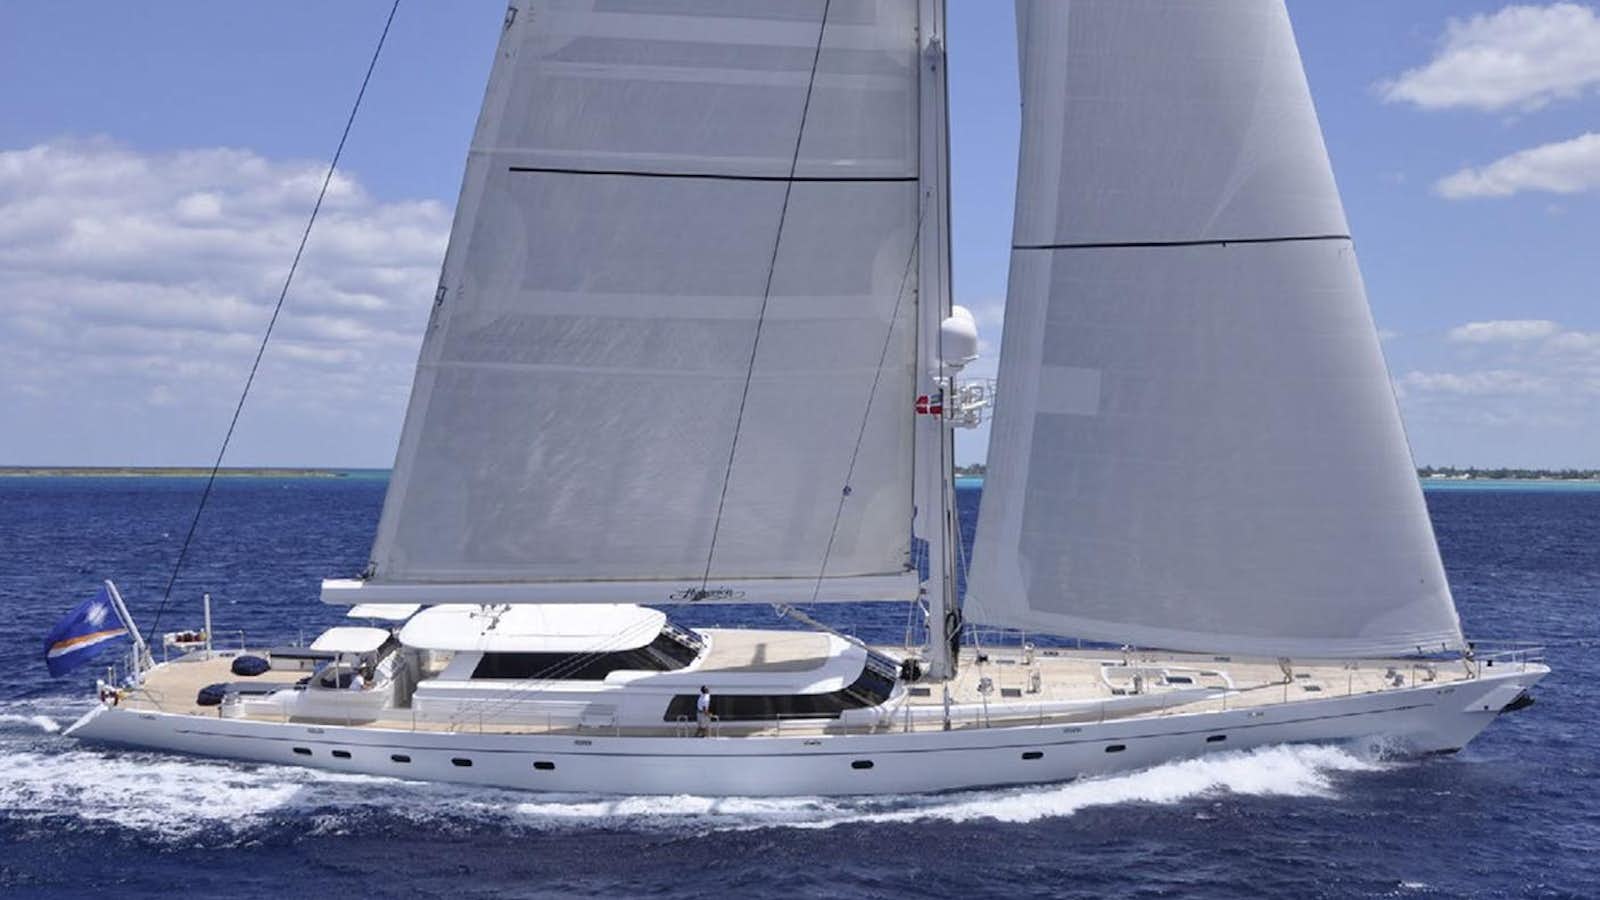 a sailboat on the water aboard HYPERION Yacht for Sale